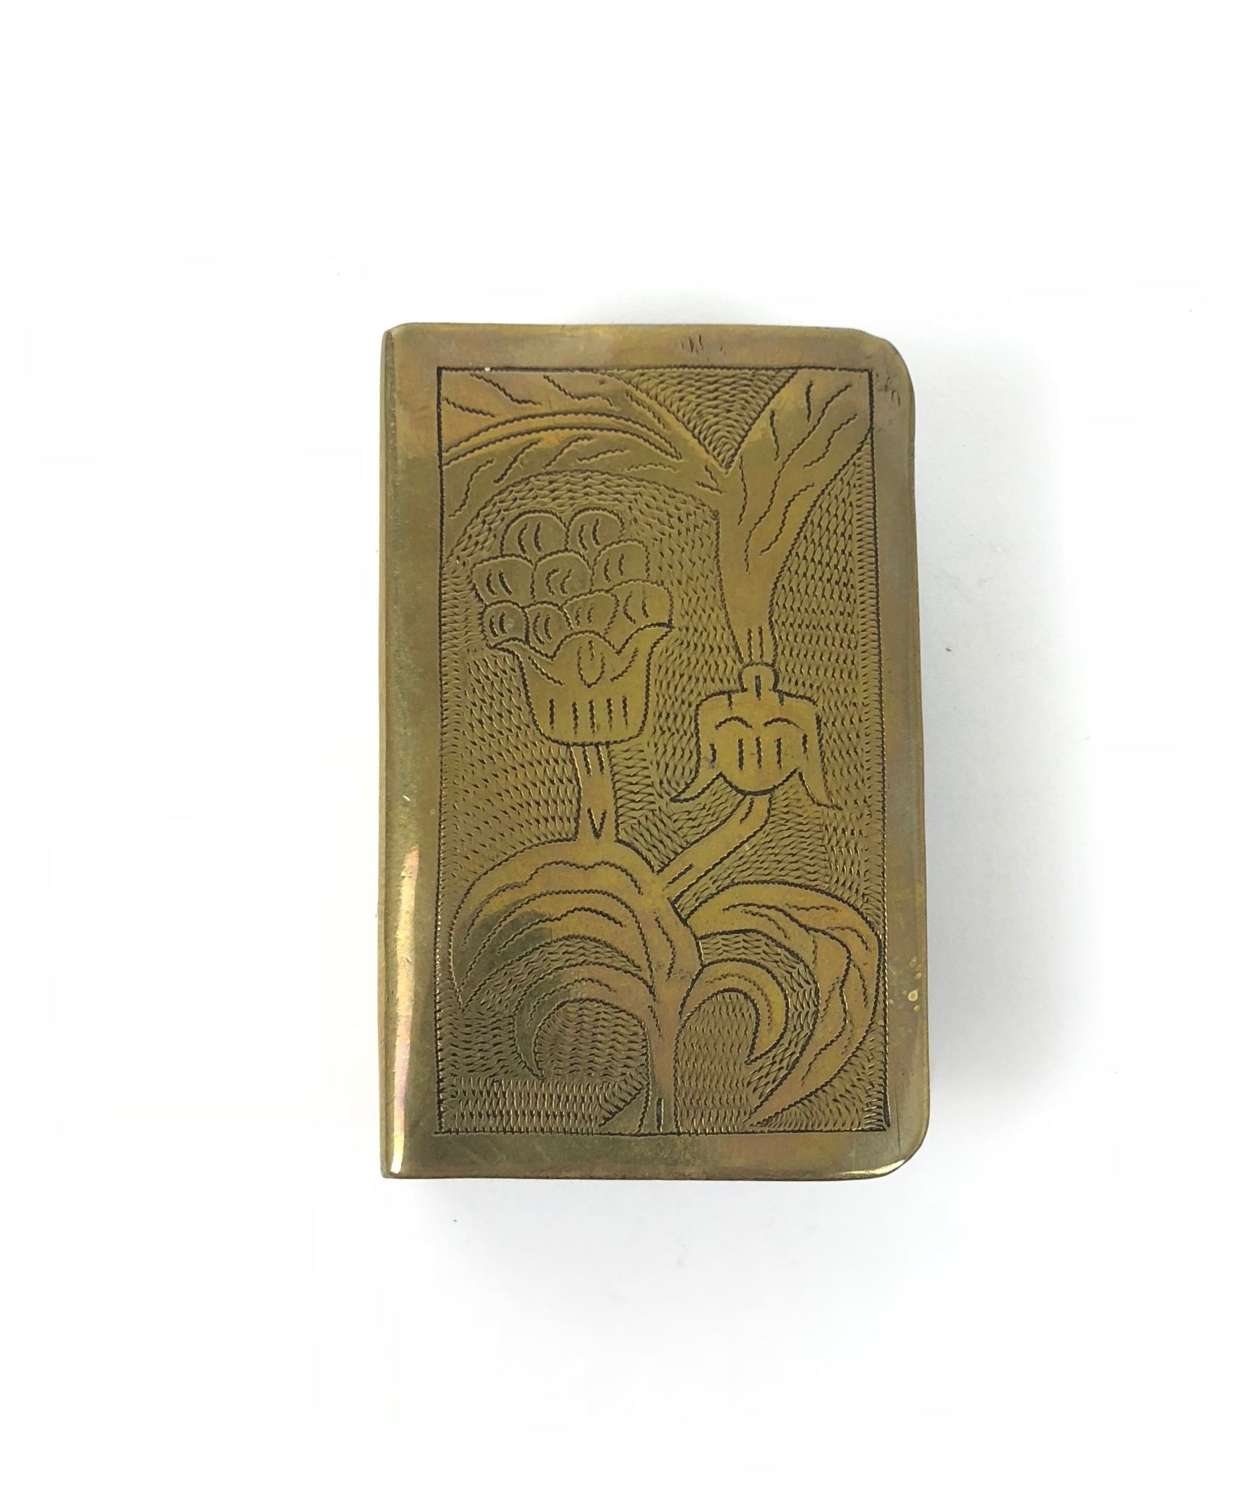 WW1 Trench Art Matchbox Cover. France